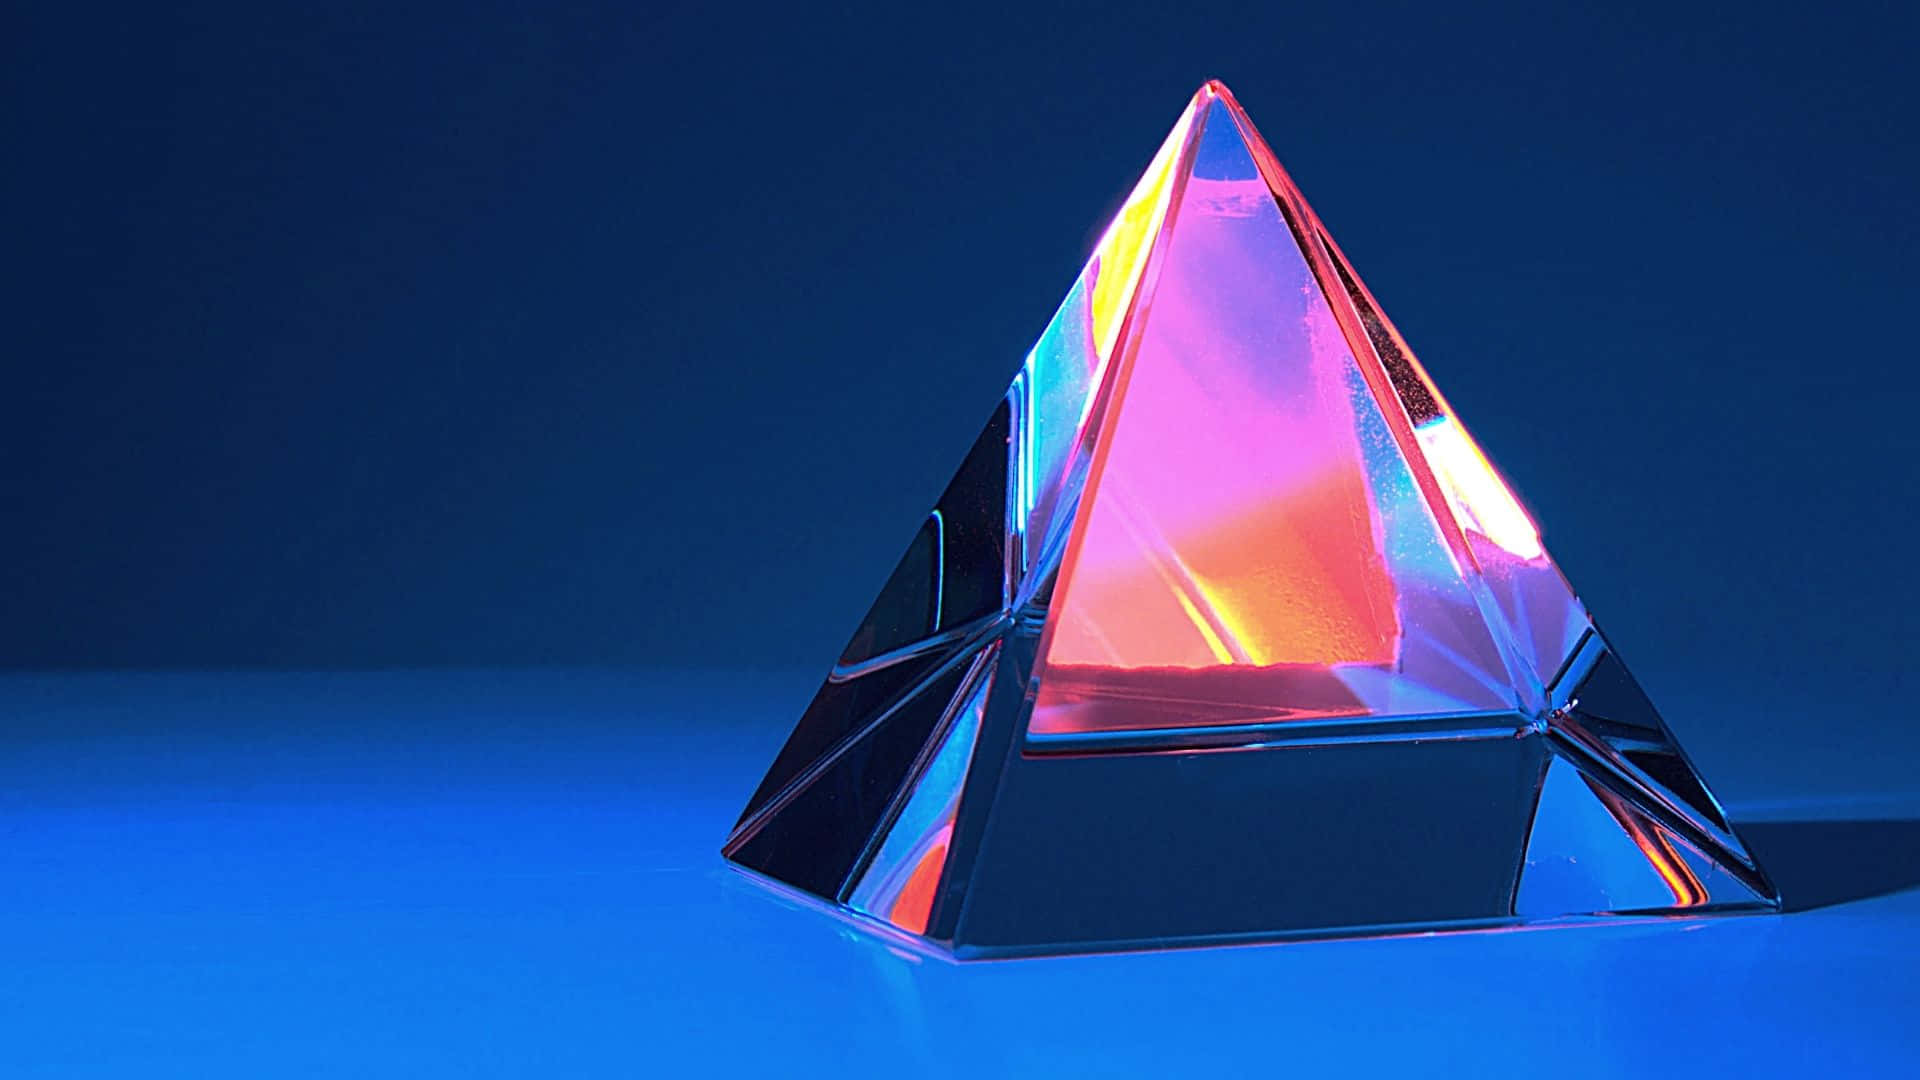 Be Amazed By The Beauty Of A Crystal